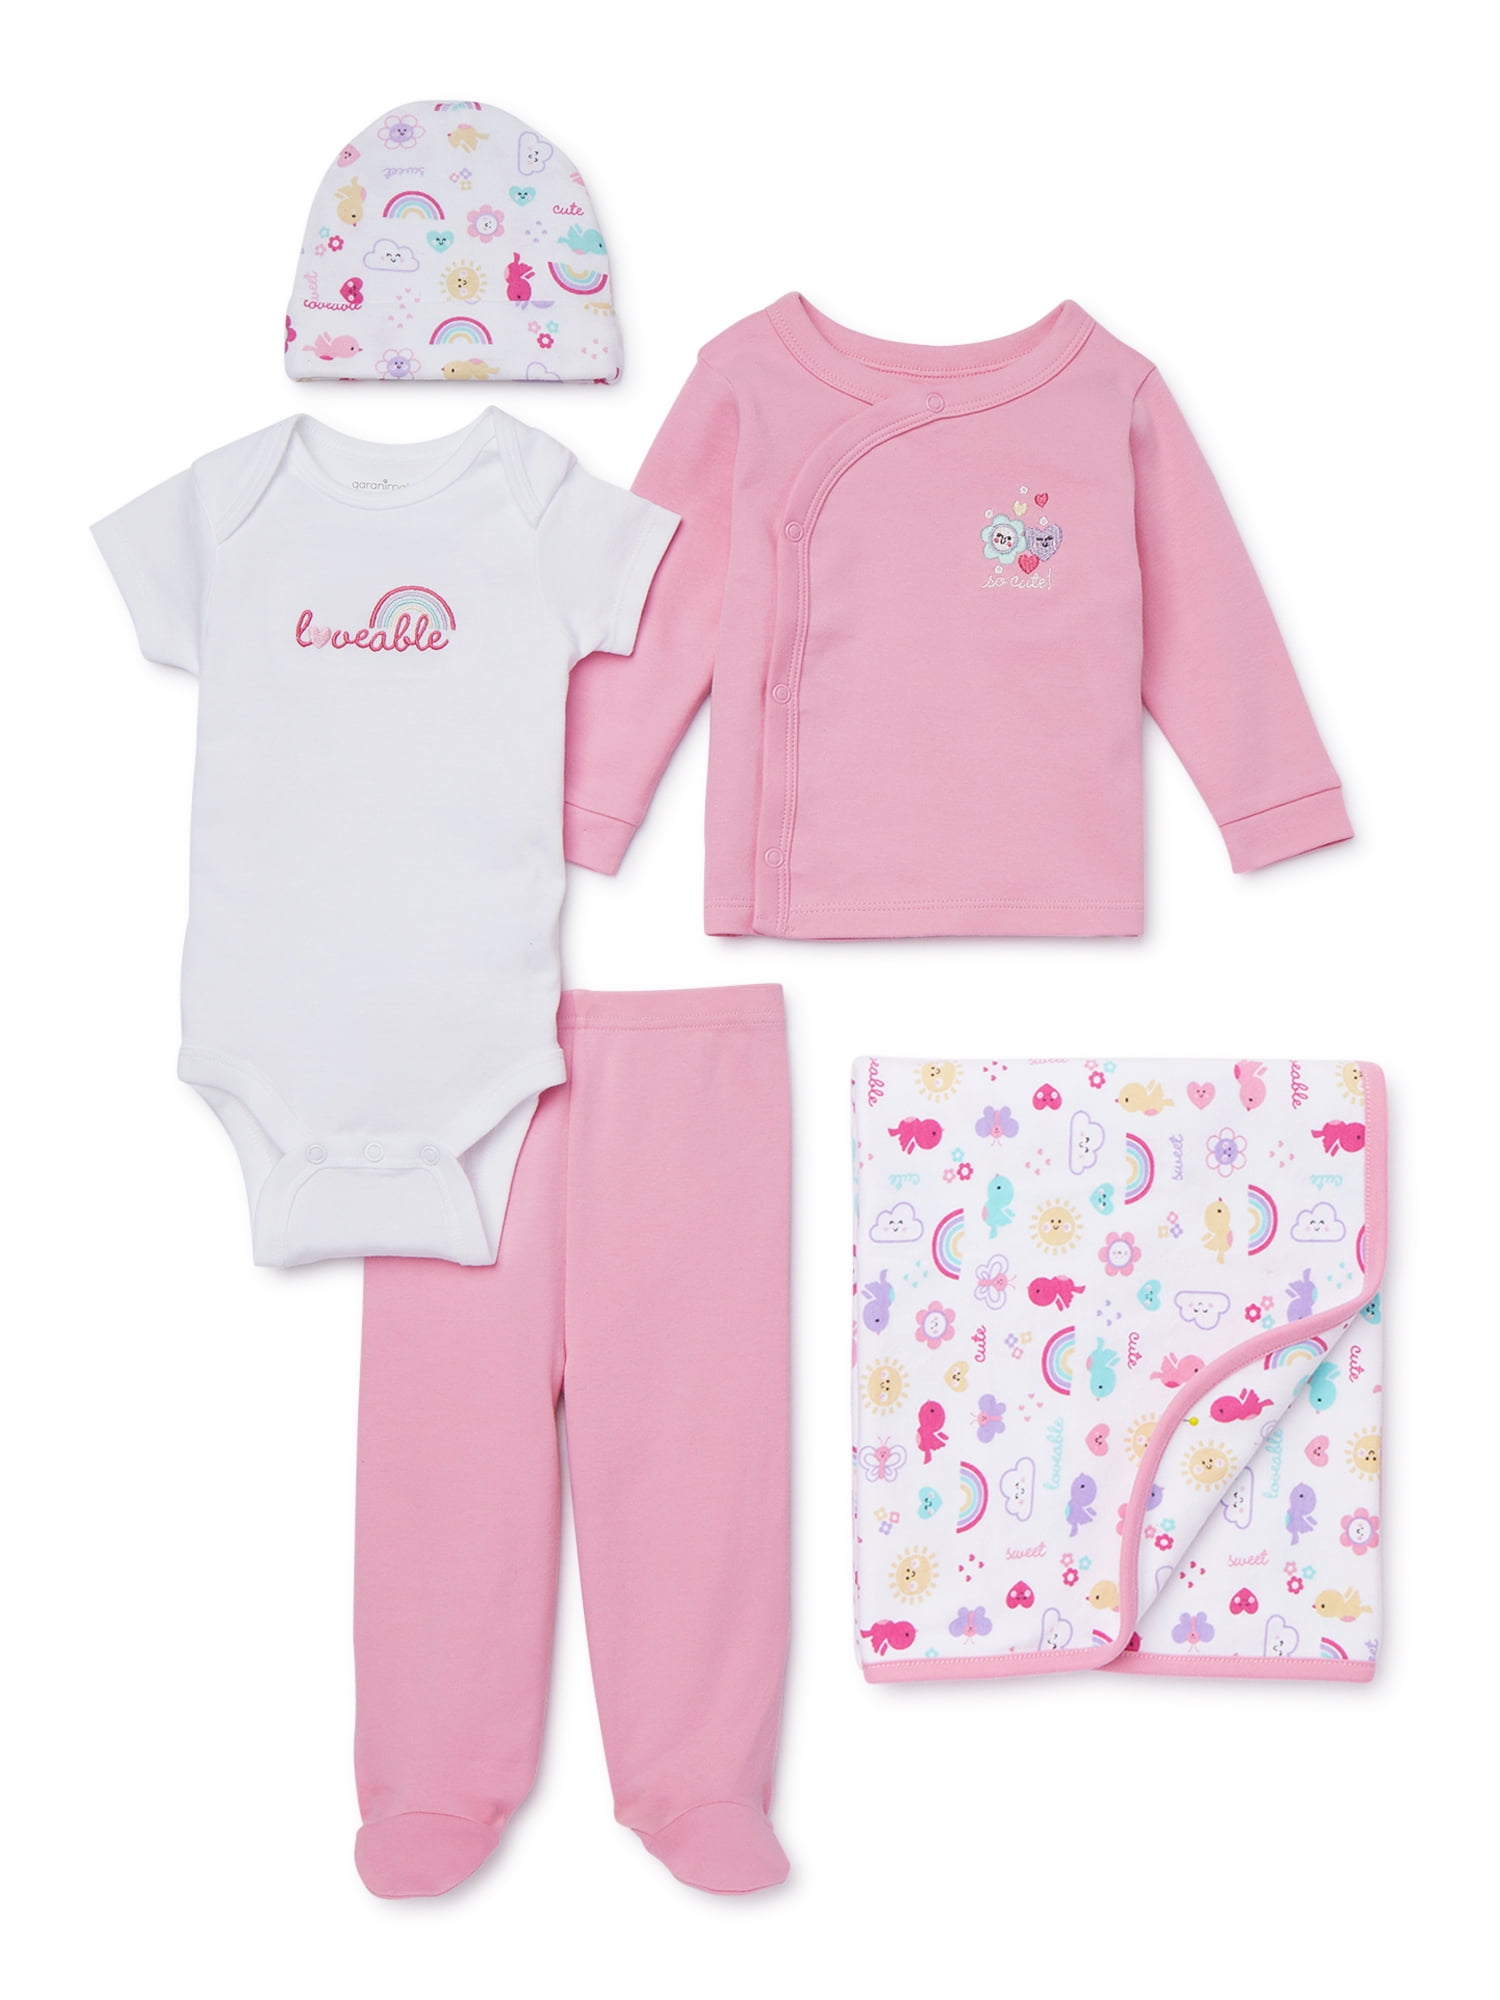 BABY GIRL 5 PIECE LAYETTE SET WITH PONY DESIGN AND FREE GIFT BAG 